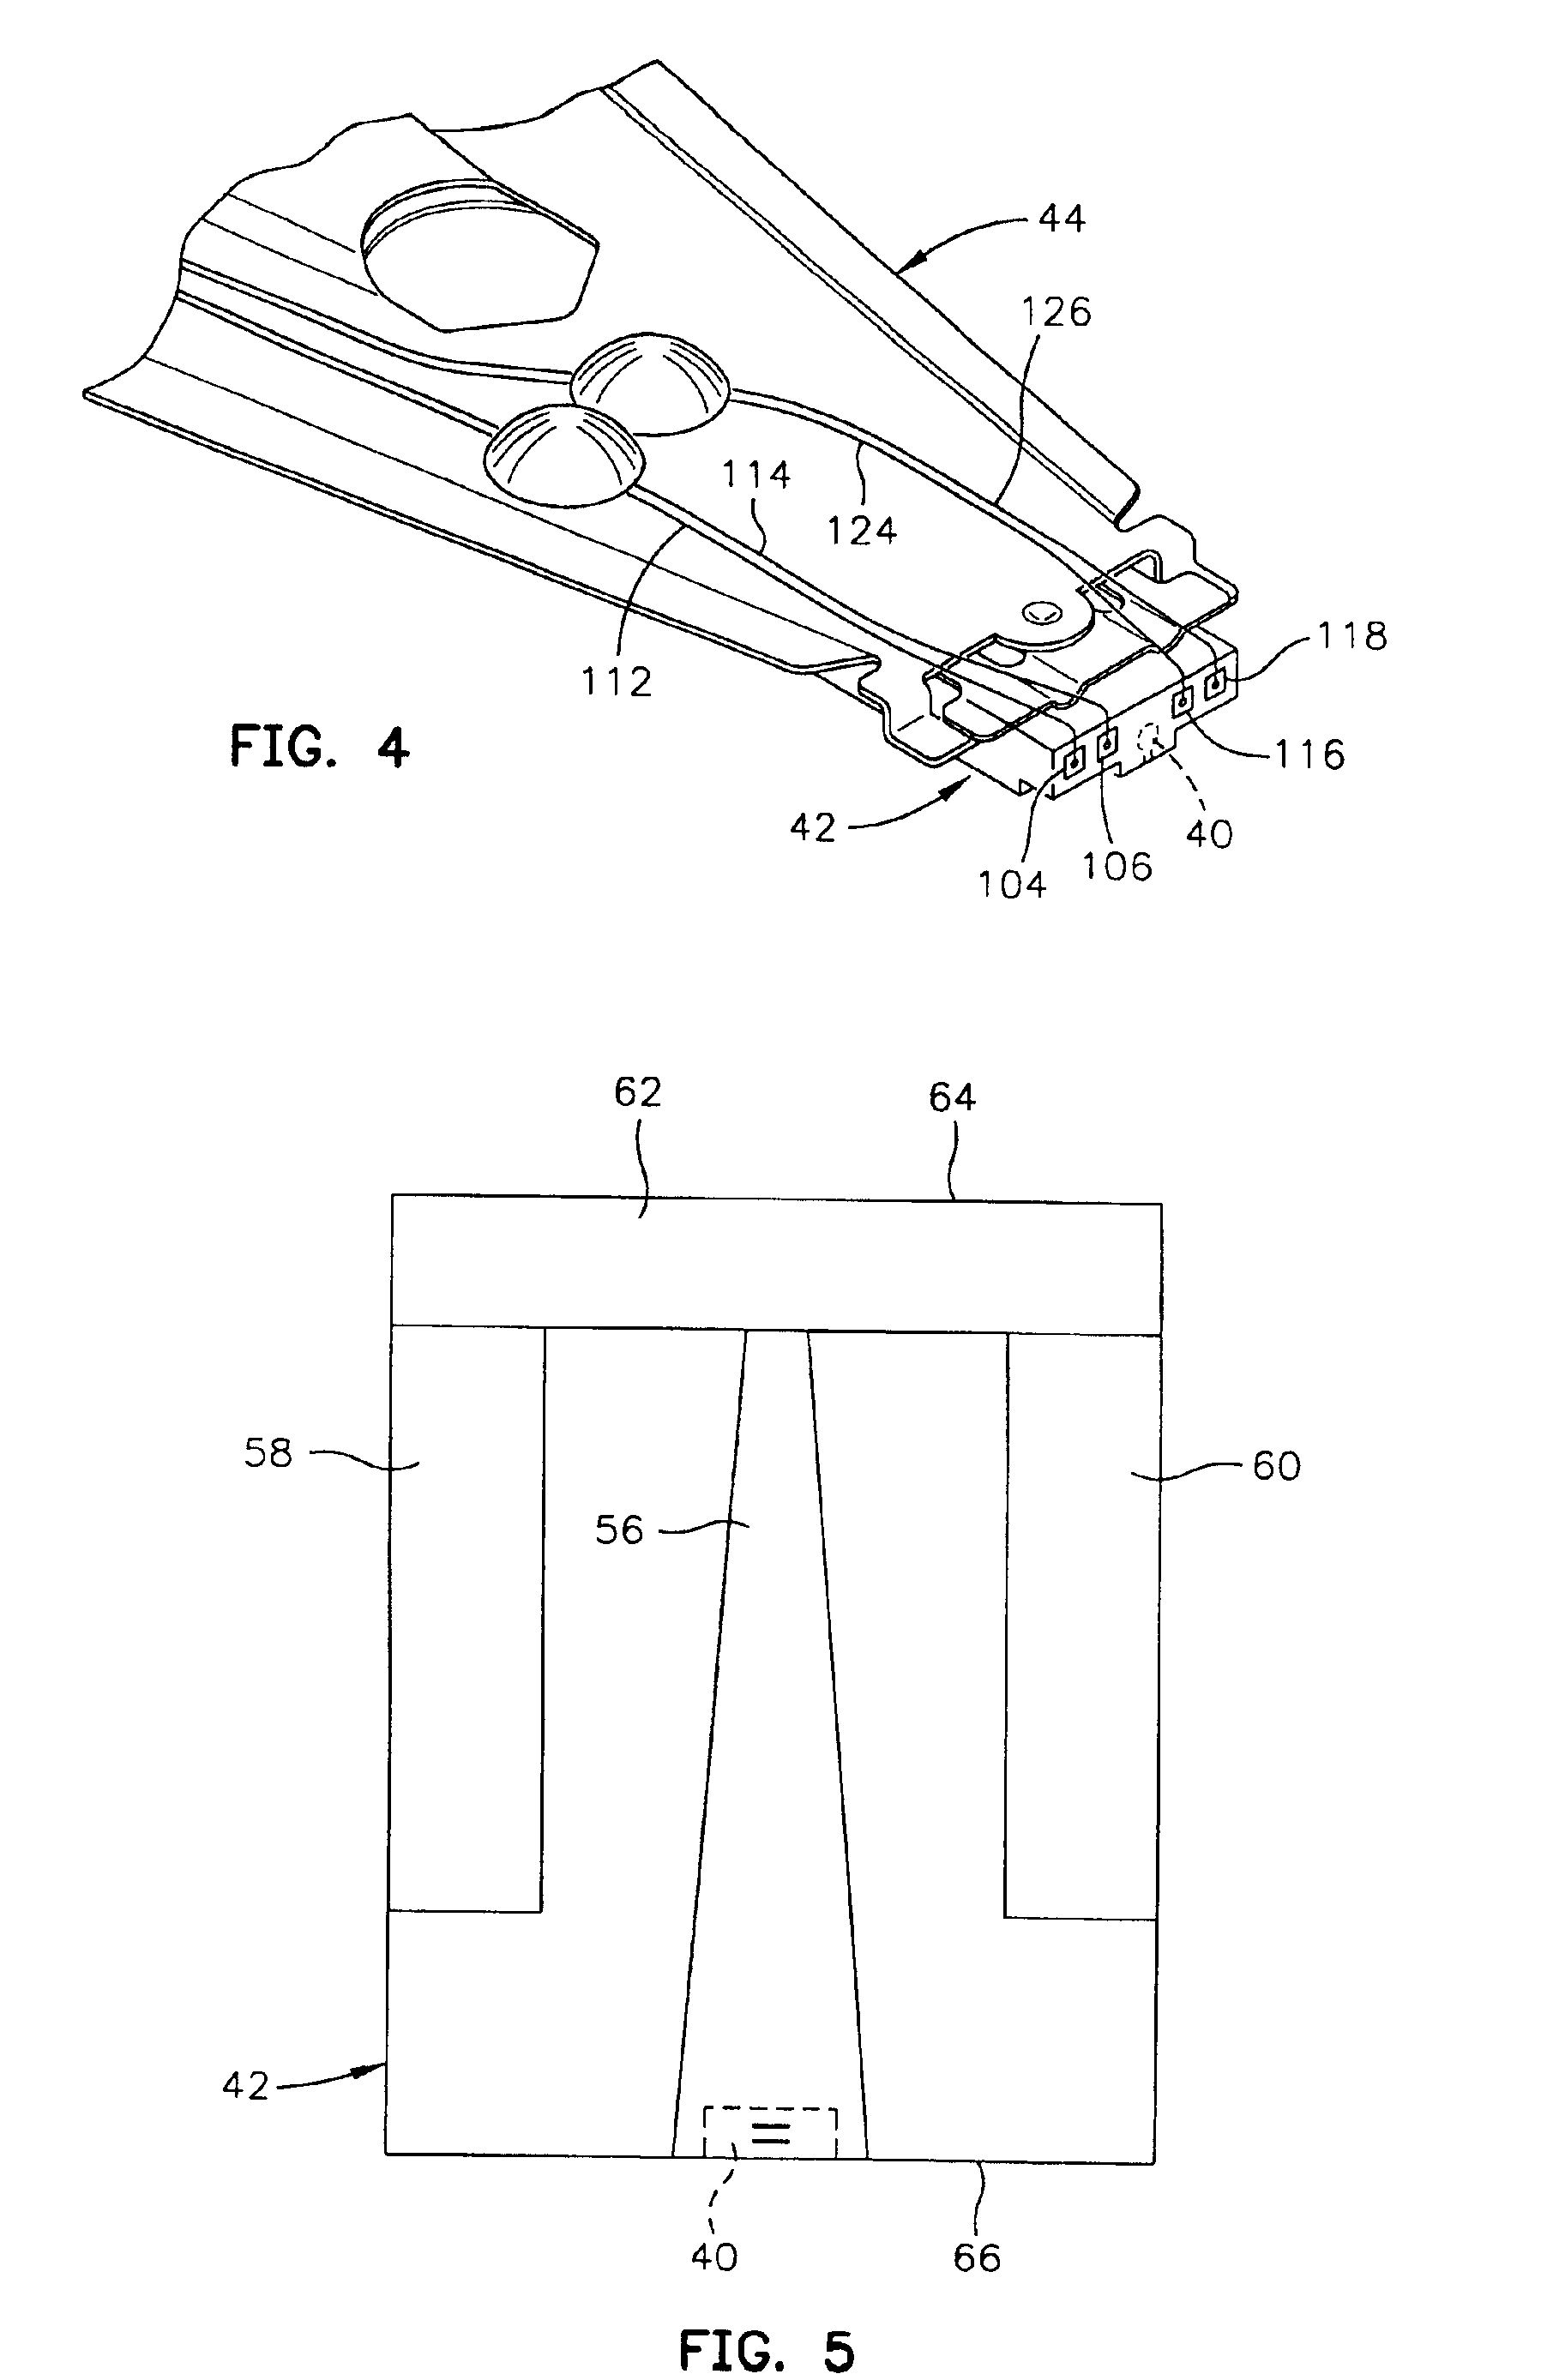 Method of reducing ESD damage in thin film read heads which enables measurement of gap resistance